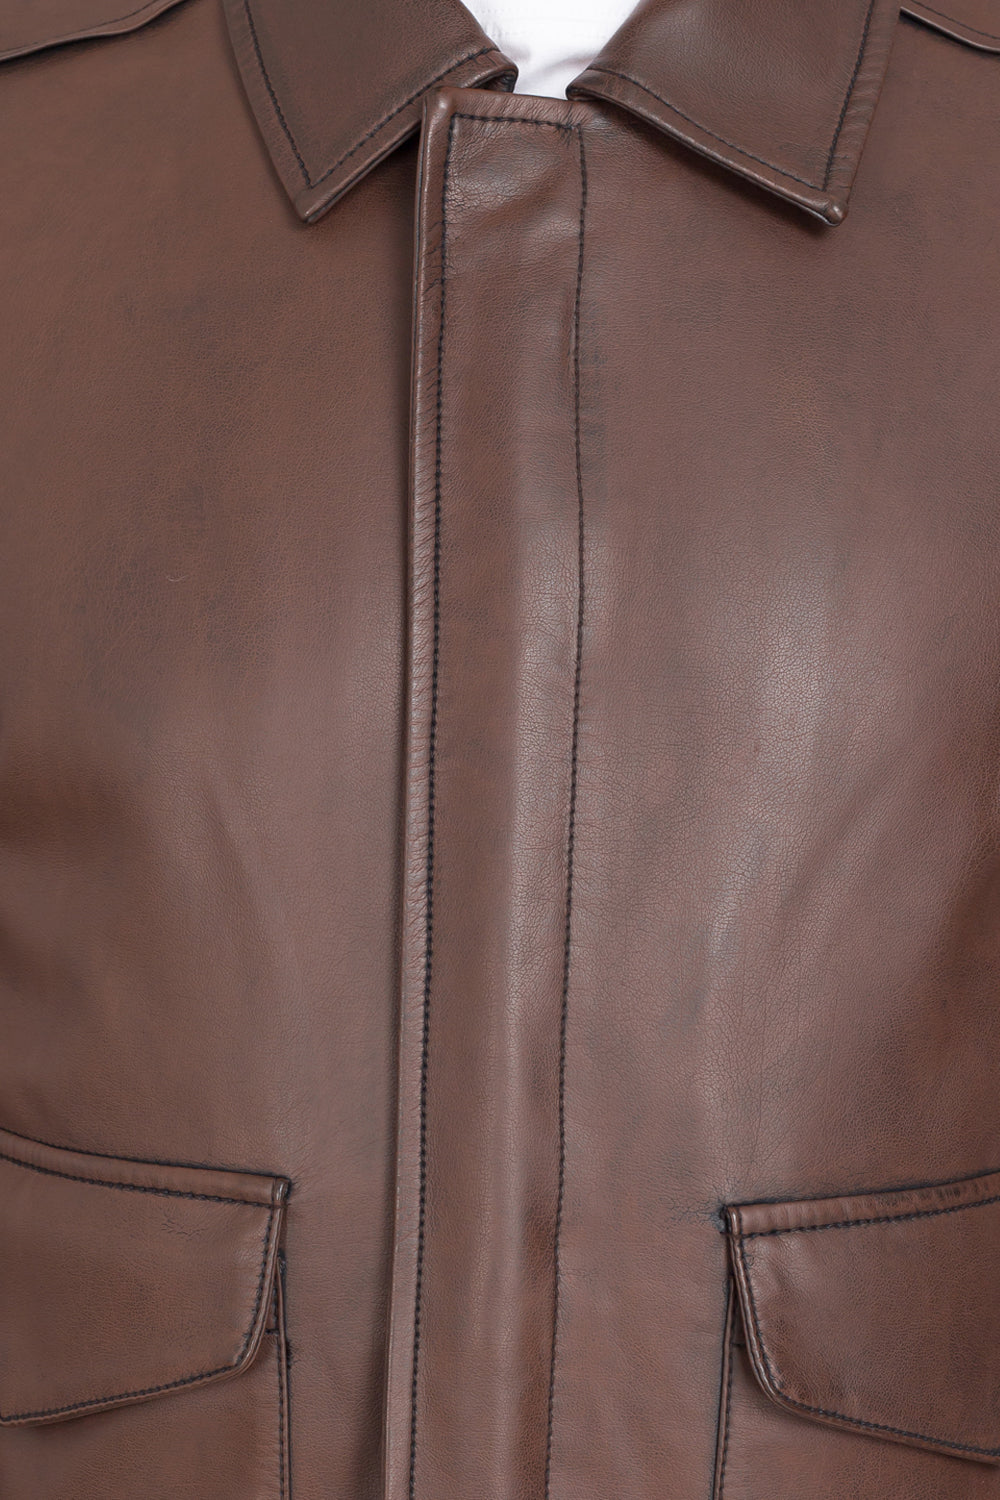 Justanned Brown Bomber Leather Jacket